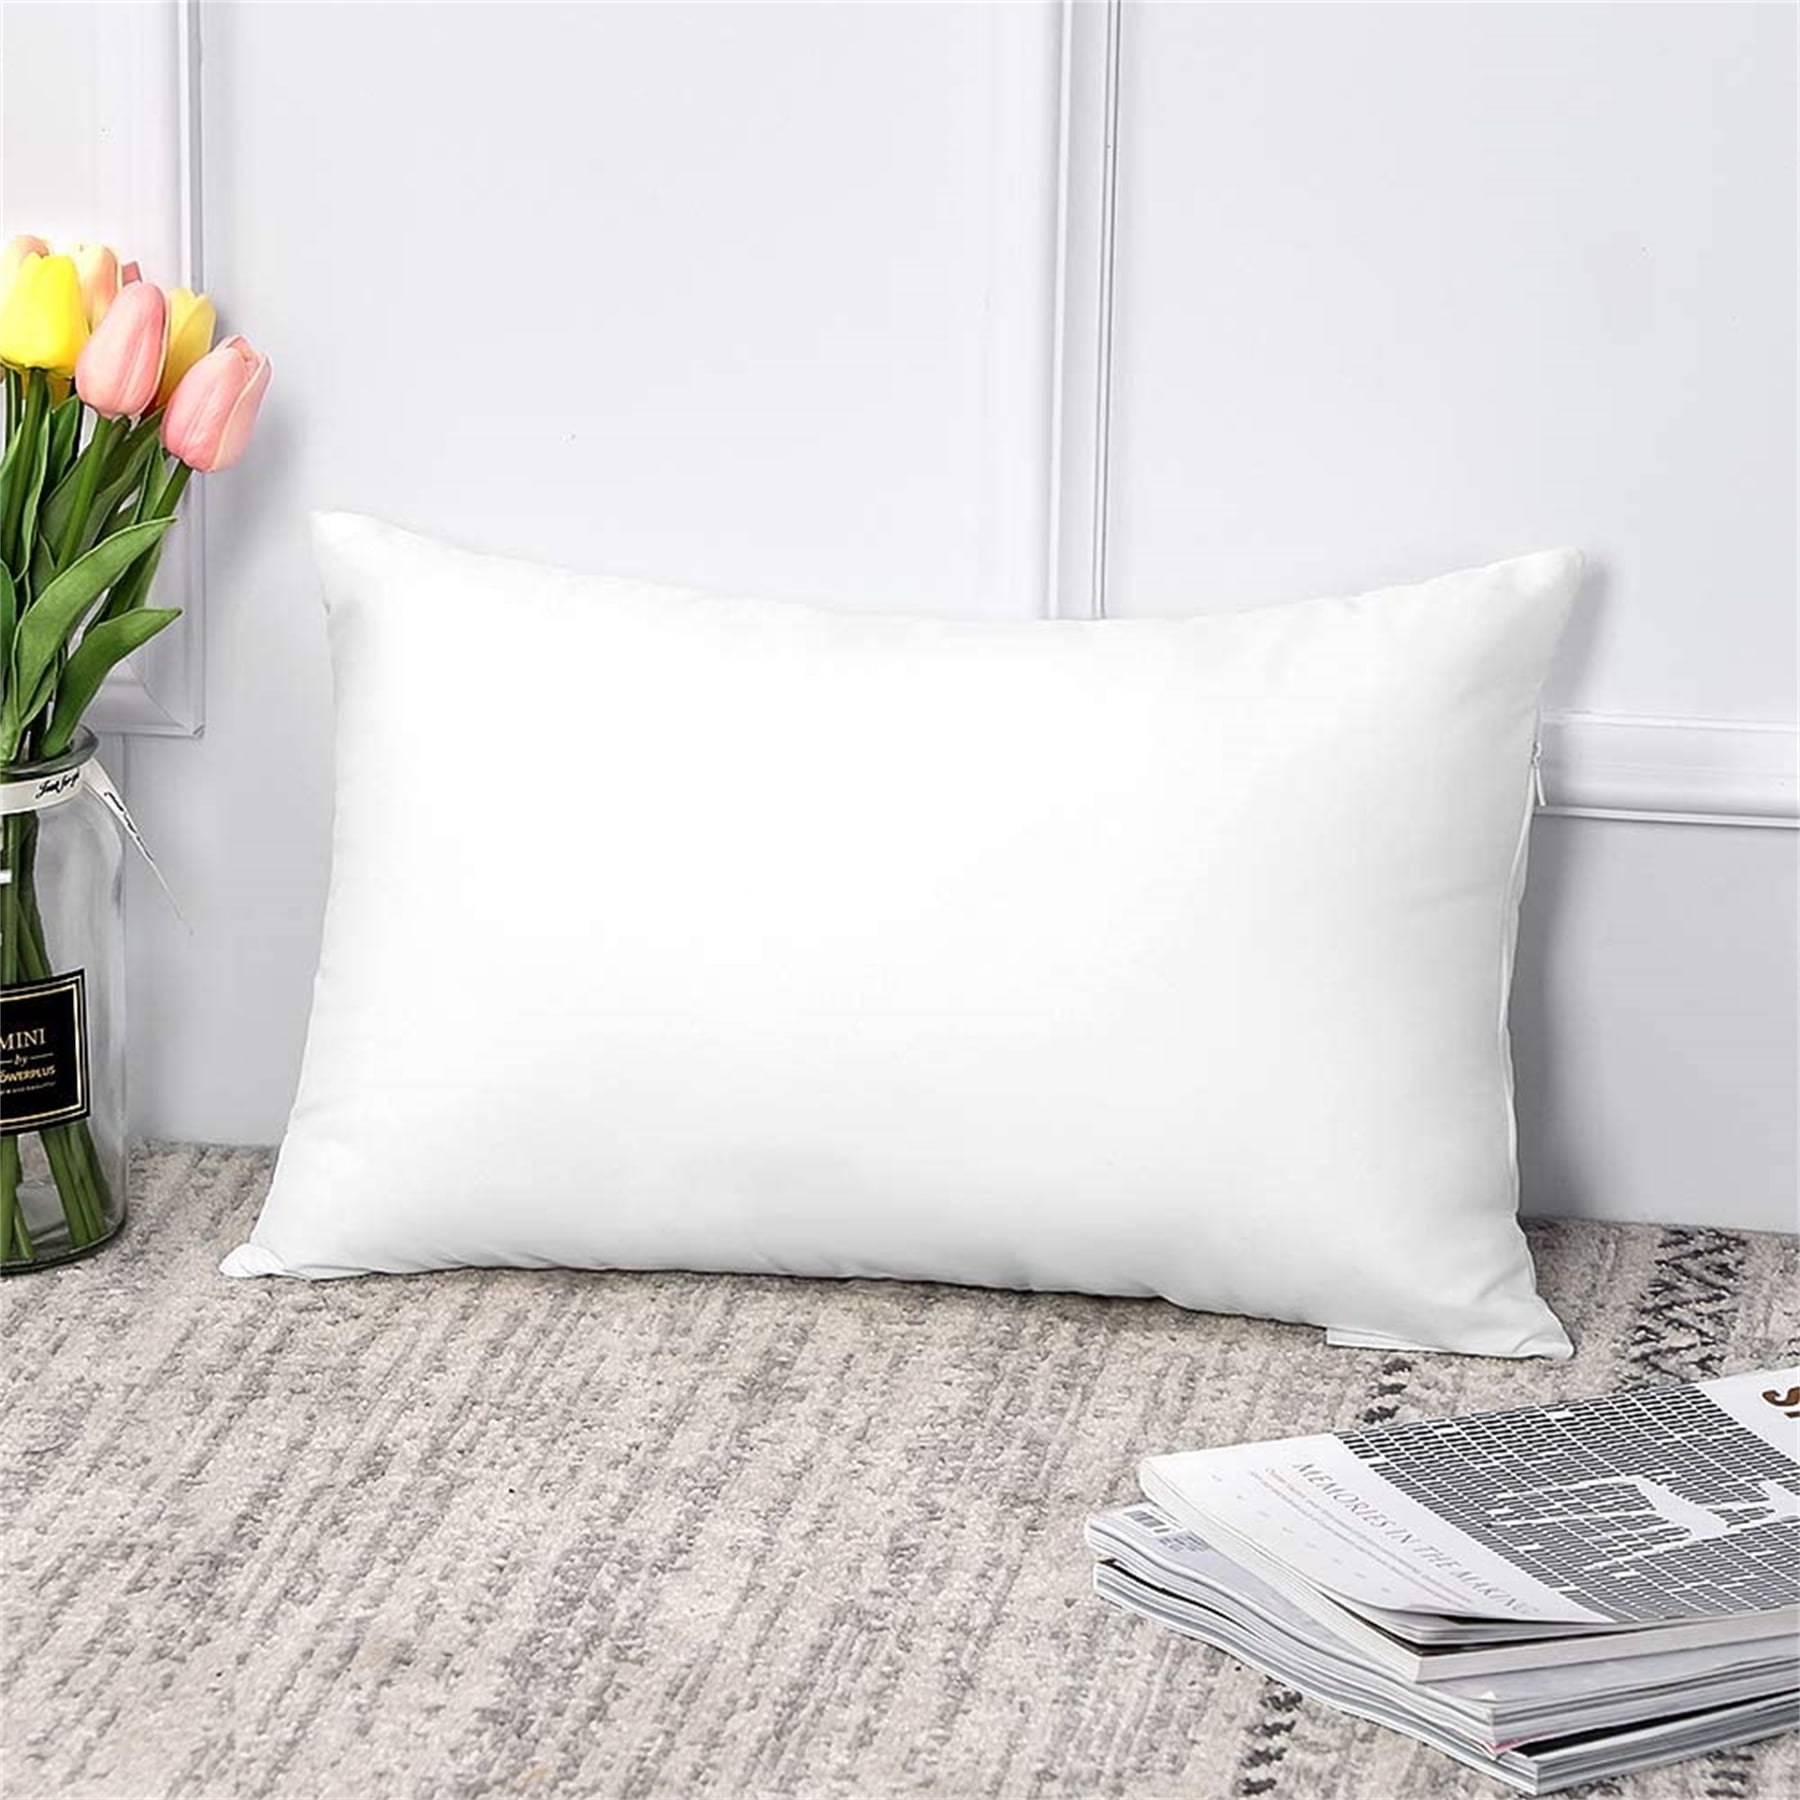 Utopia Bedding Throw Pillows (Set of 4, White), 18 x 18 Inches Pillows for  Sofa, Bed and Couch Decorative Stuffer Pillows